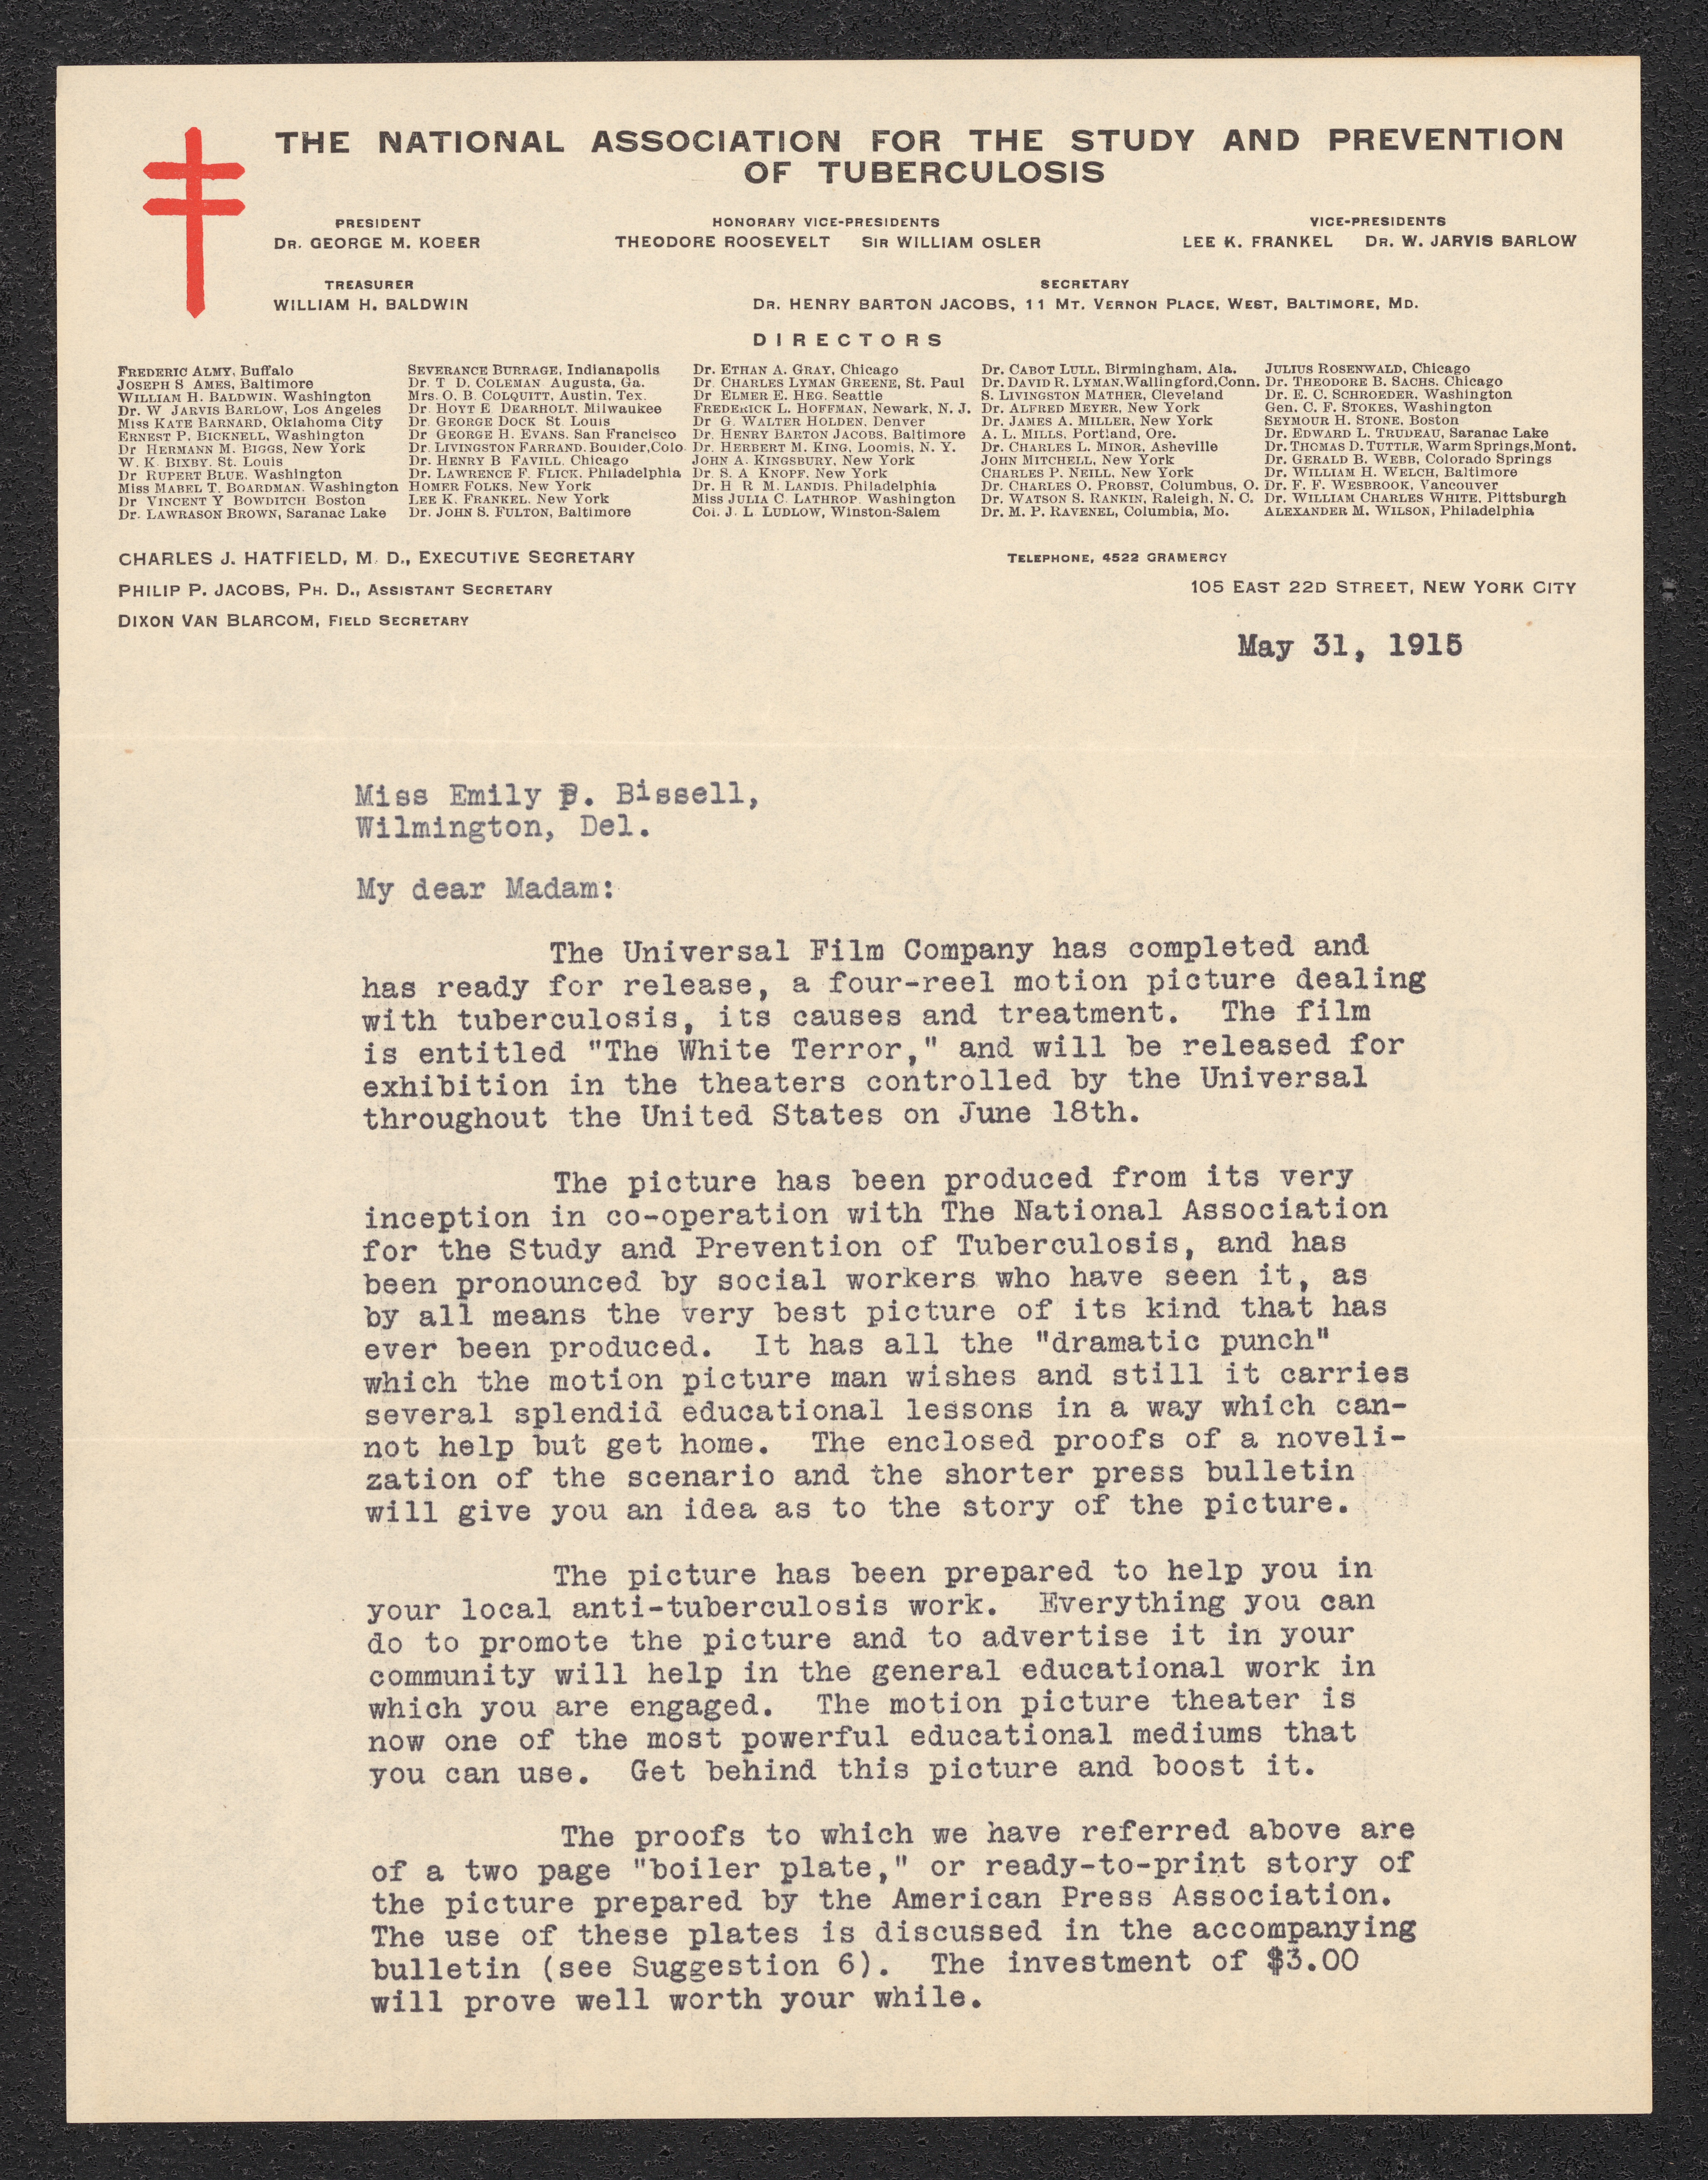 Letter, Philip P. Jacobs to Emily P. Bissell, May 31, 1915